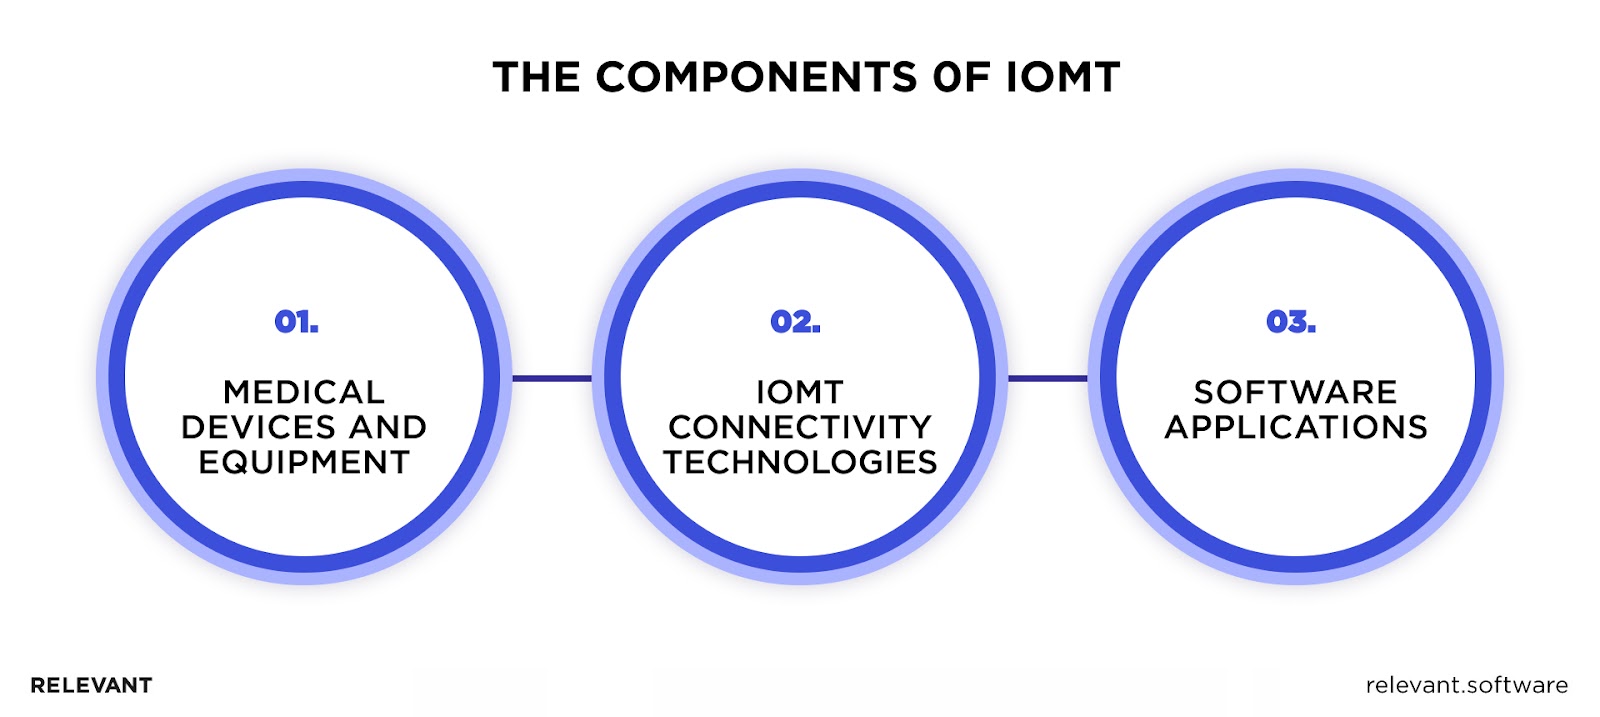 The Components of IoMT